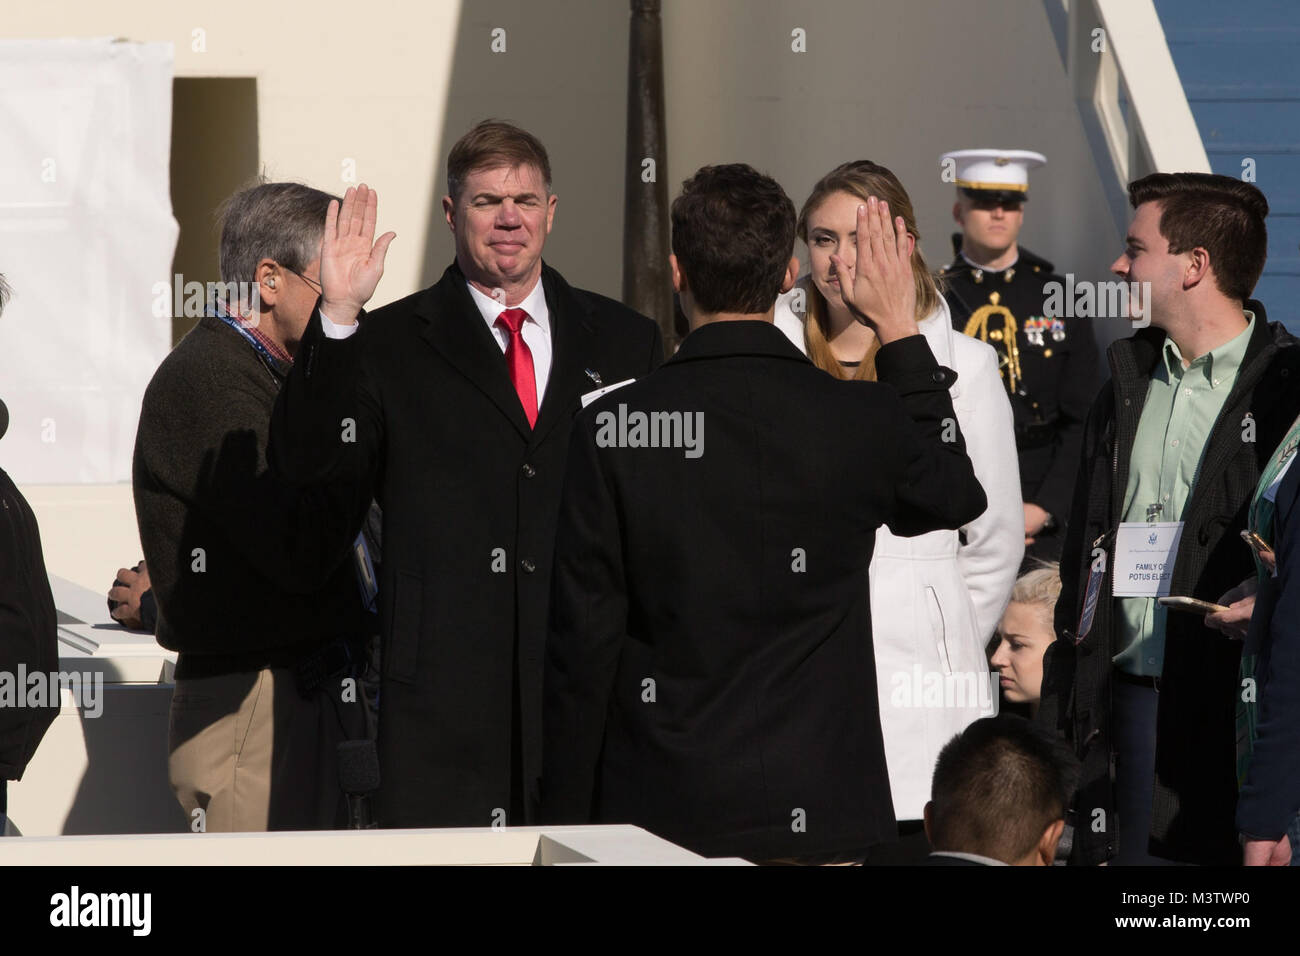 The stand-in for President Elect Donald J. Trump swears in during the Department of Defense Dress rehearsal for the 58th Presidential Inauguration ceremony, at Washington D.C., Jan. 15, 2017. More than 5,000 military members from across all branches of the armed forces of the United States, including Reserve and National Guard components, provided ceremonial support and defense support of civil authorities during the inaugural period. (DoD Photo by U.S. Marine Corps Lance Cpl. Cristian L. Ricardo) 170115-D-BP749-0186 by AirmanMagazine Stock Photo